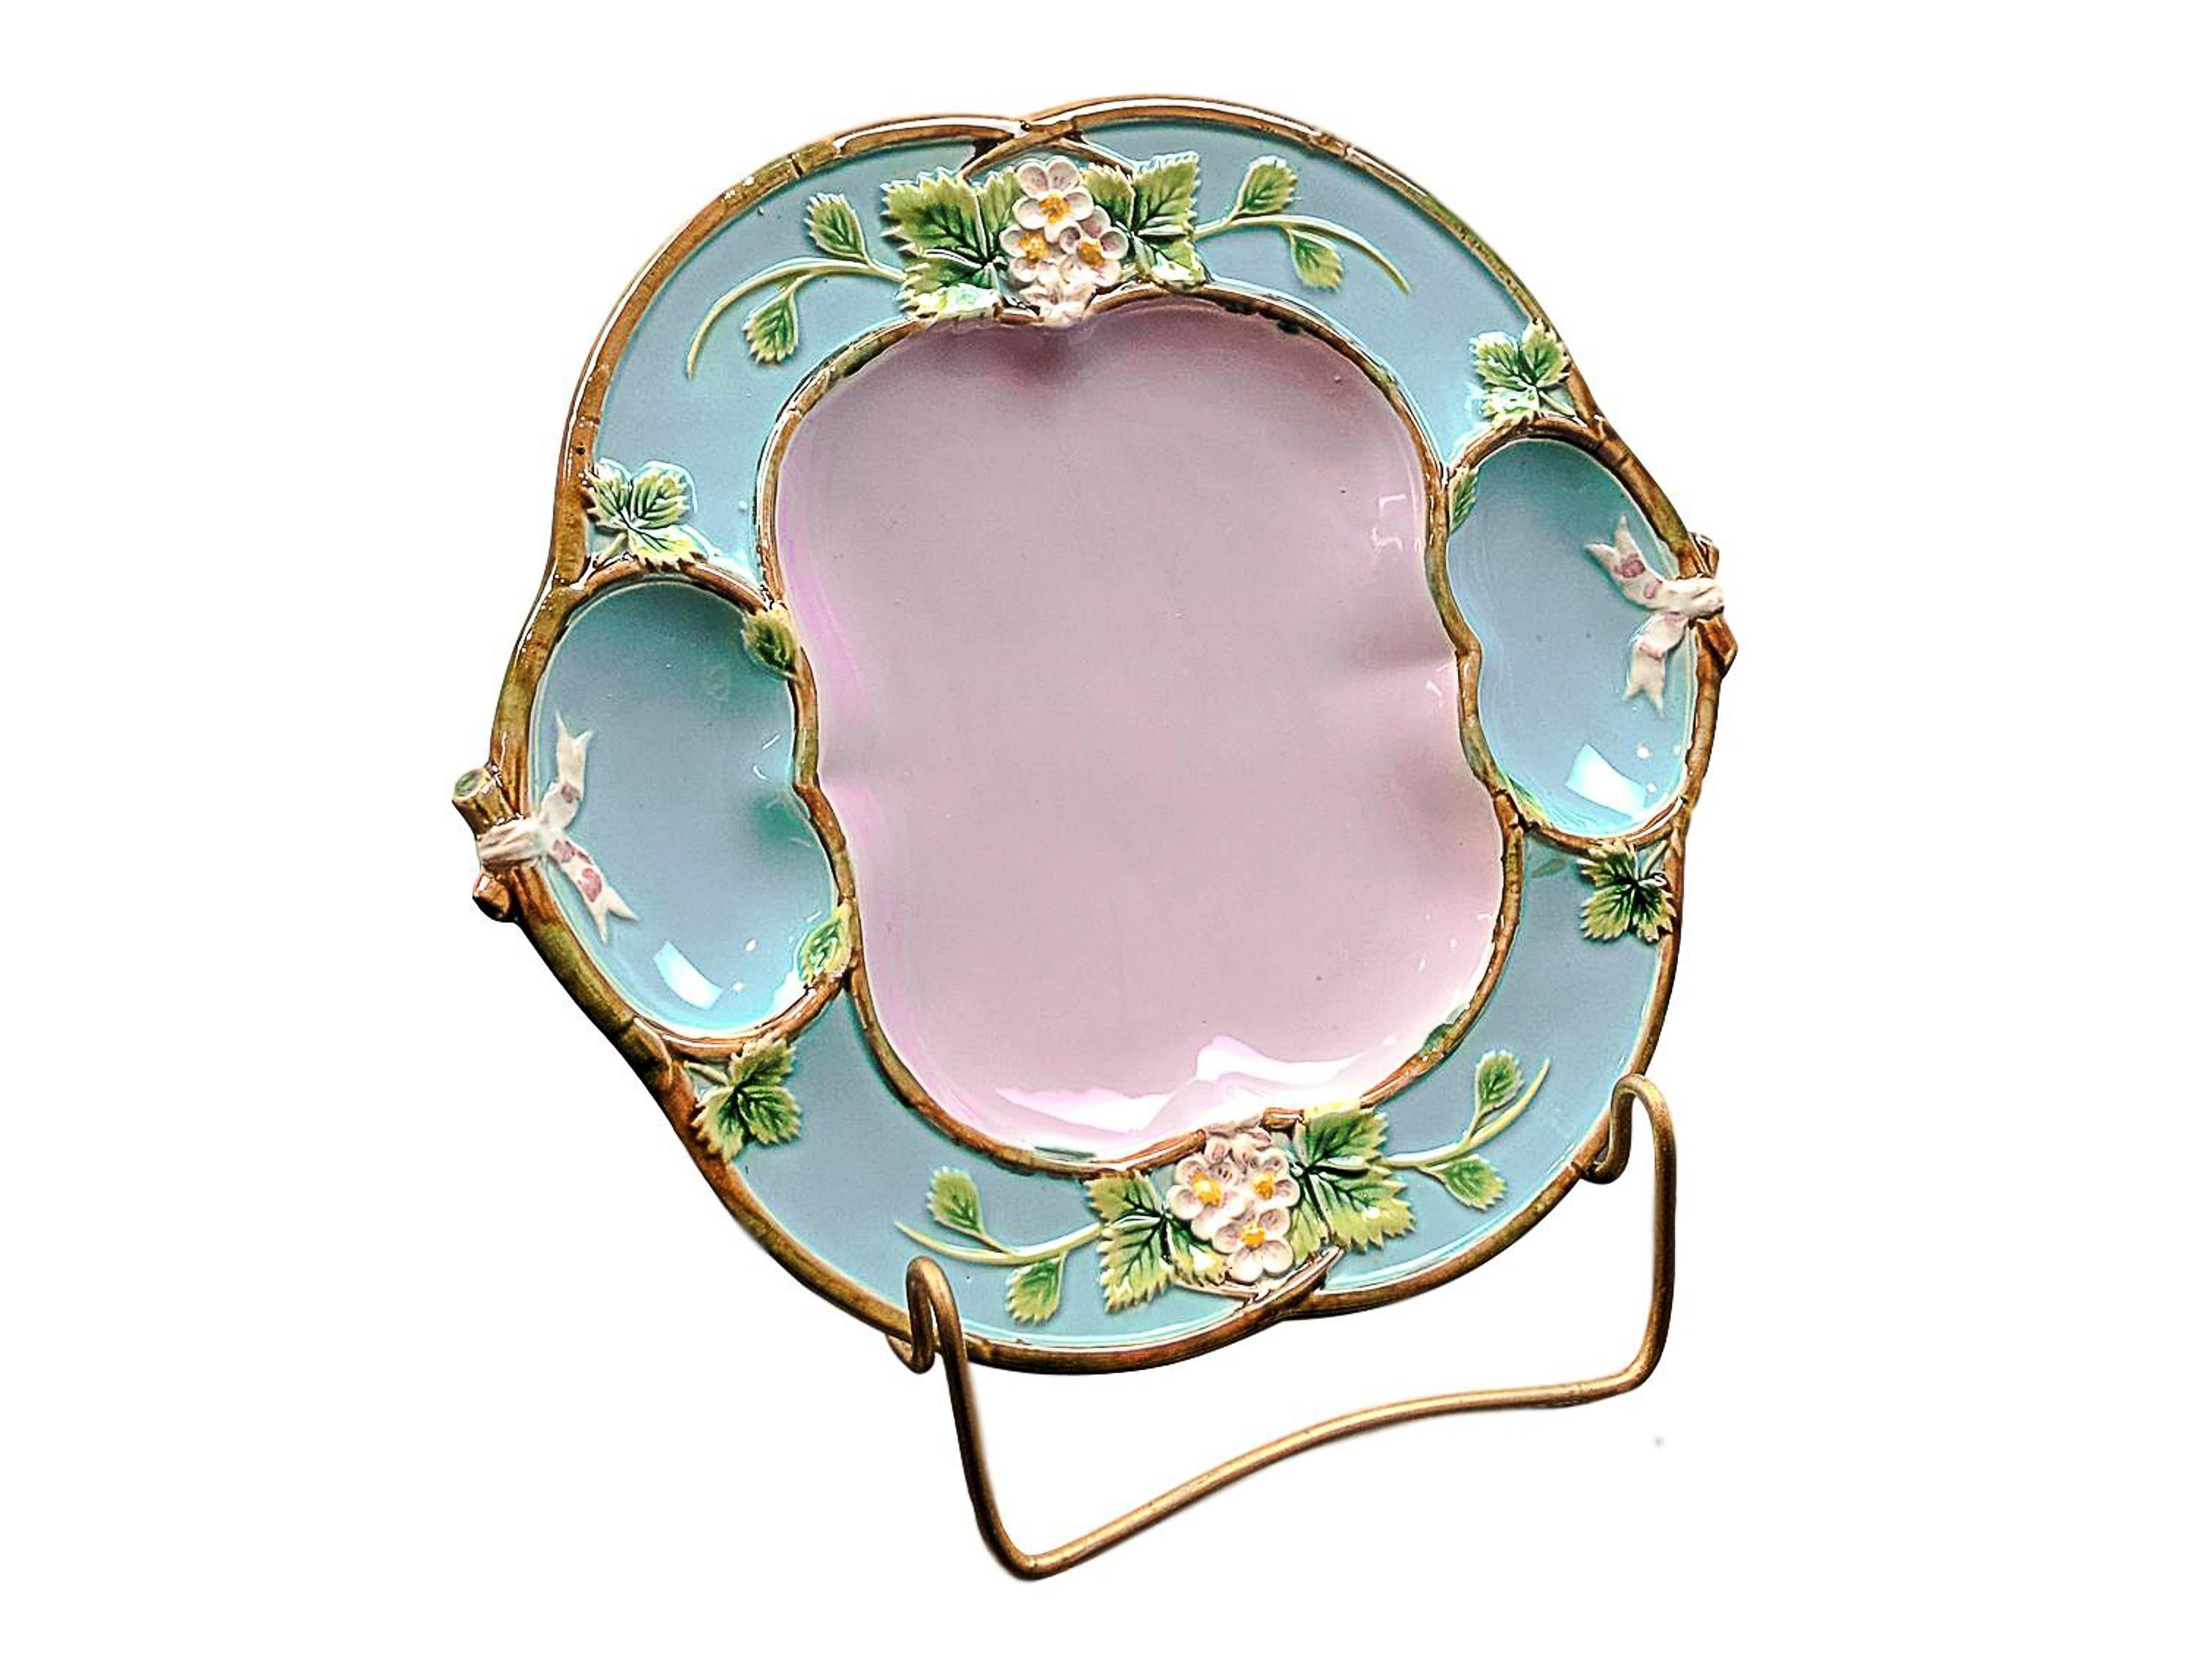 George Jones Majolica 'Strawberry Tray' with cream and sugar wells, English, British Registry mark to reverse for 29 April 1873, and black painted pattern number '3221P' which corresponds to 'Strawberry Tray, Pink Centre' in the George Jones